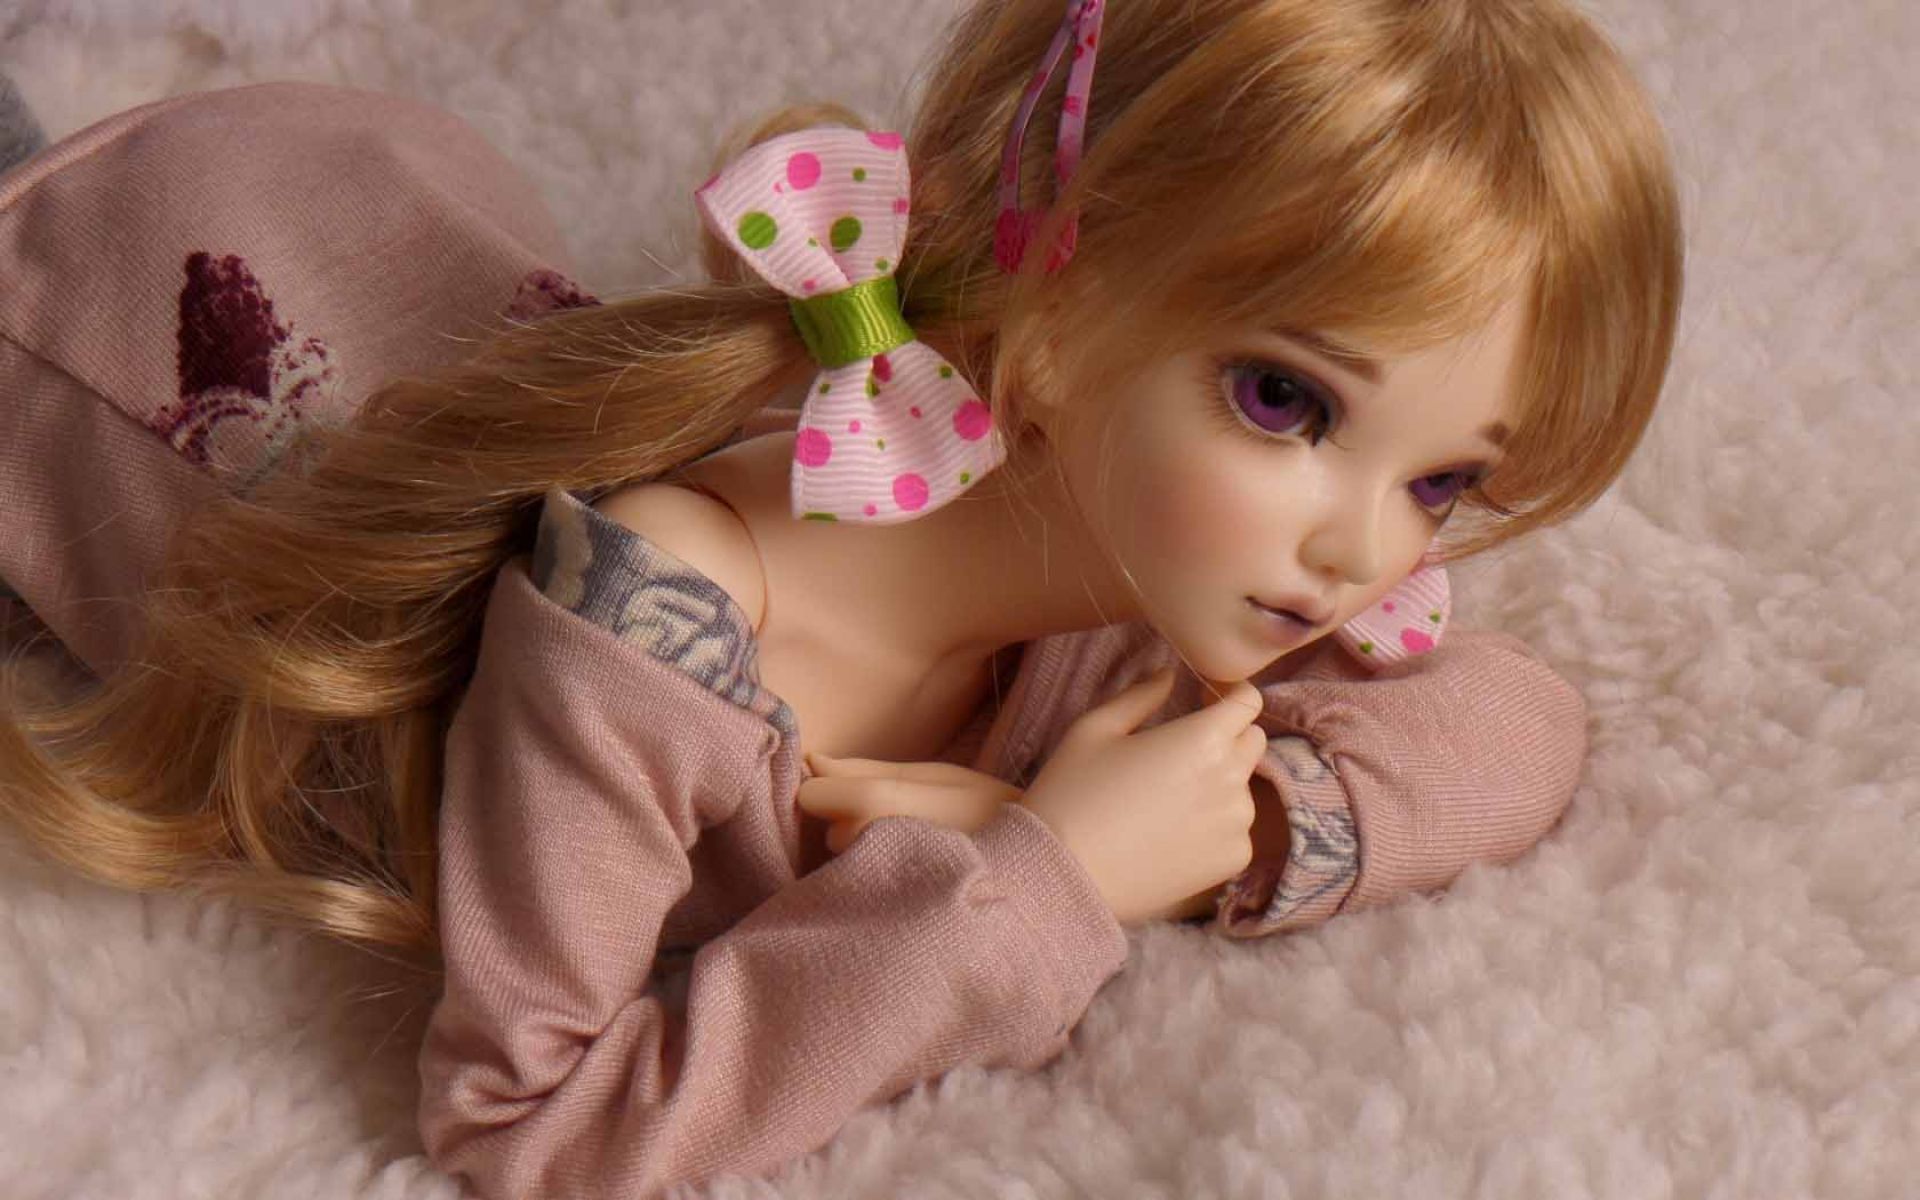 Lovely Doll Blonde Toy Wallpaper - Cute Doll Desktop Wallpaper Doll - HD Wallpaper 